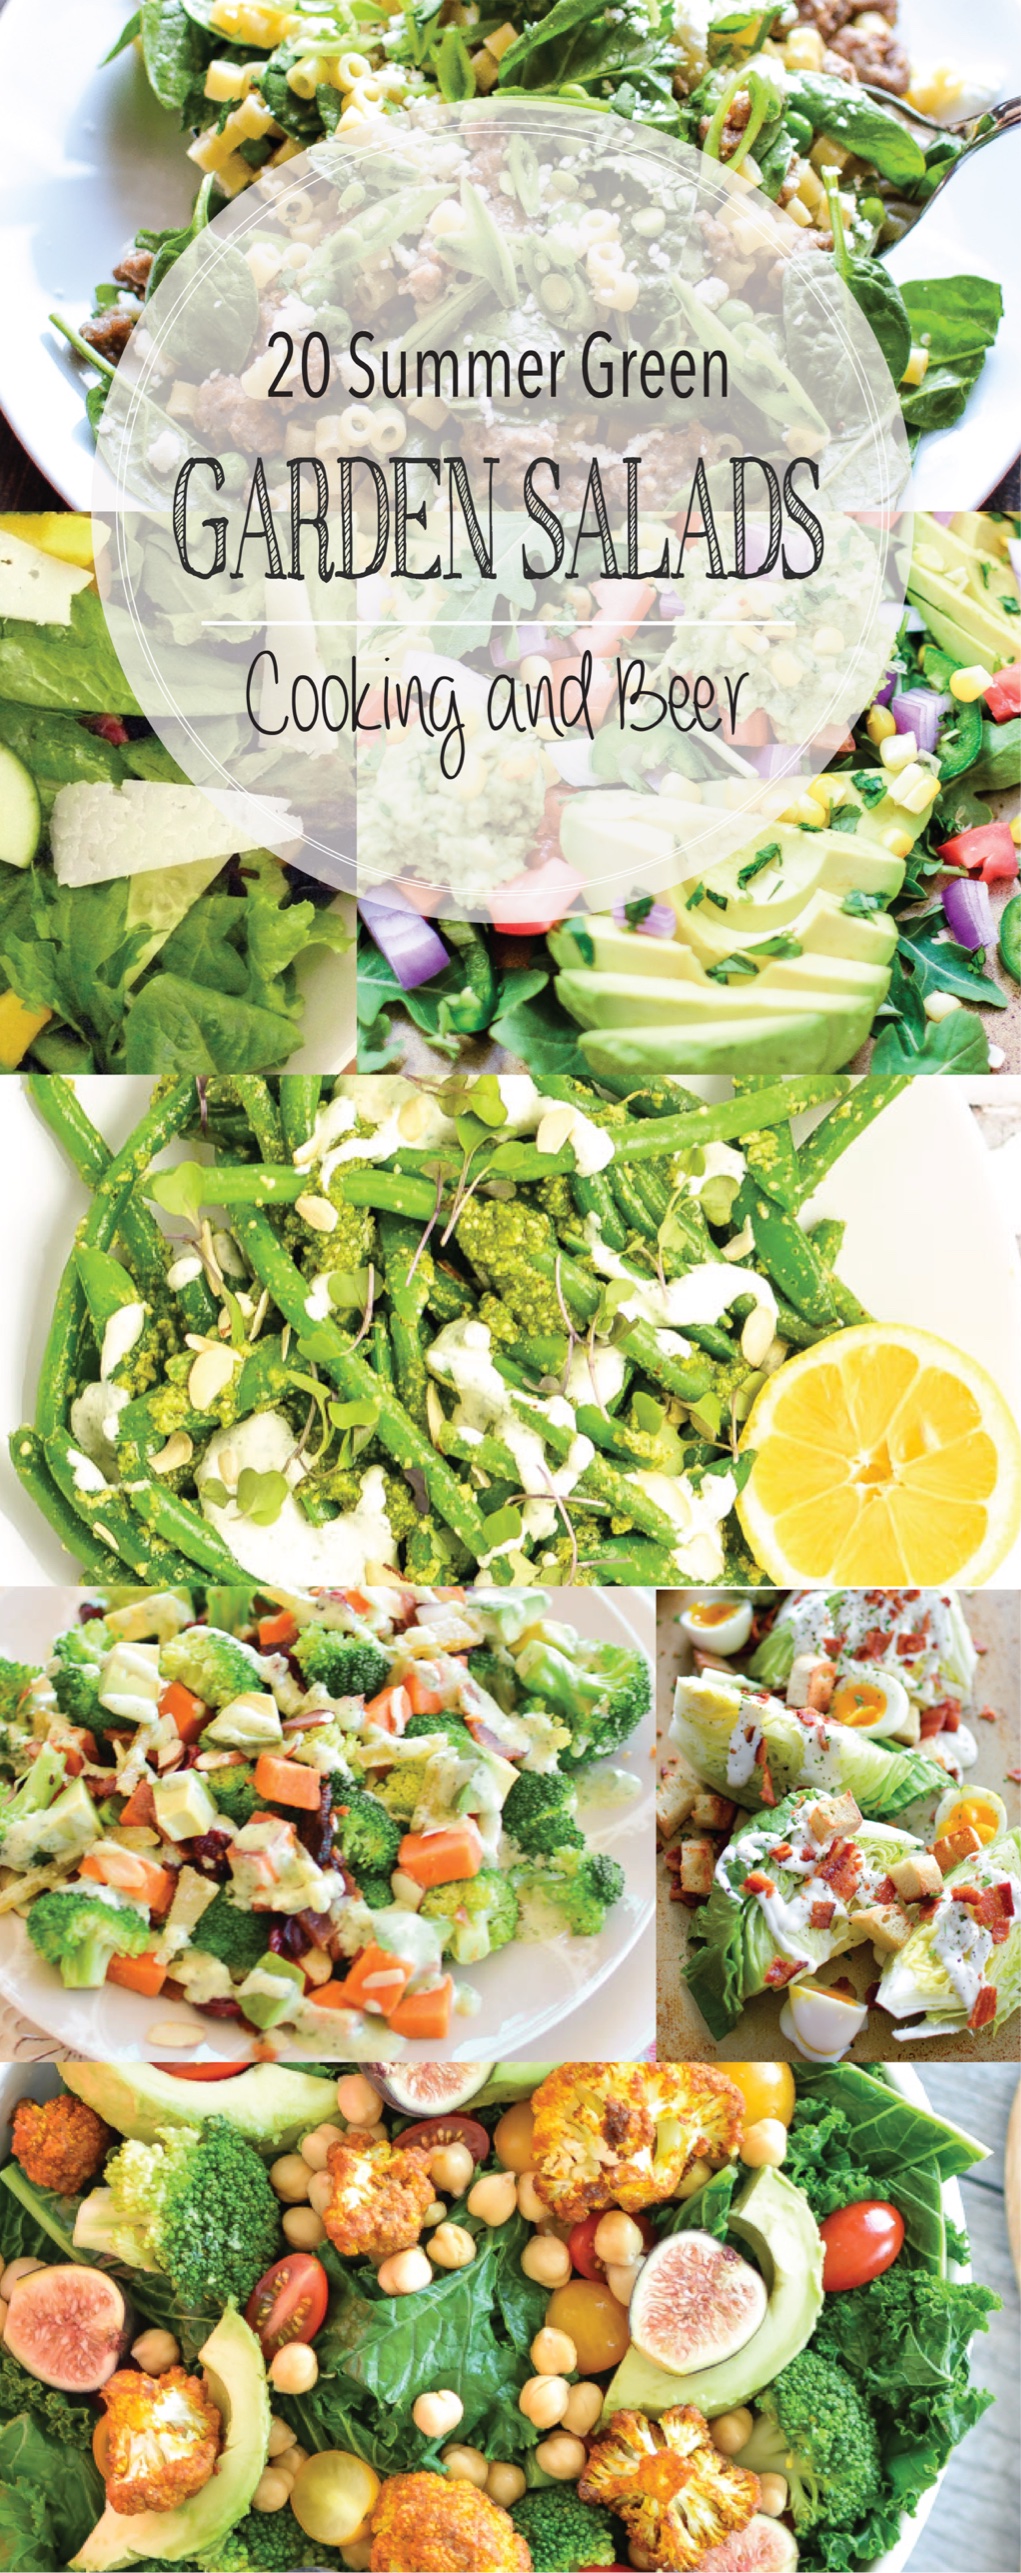 From steak to green beans and from cauliflower to kale, here are 20 summer green garden salads! Add them to your menu plans ASAP!